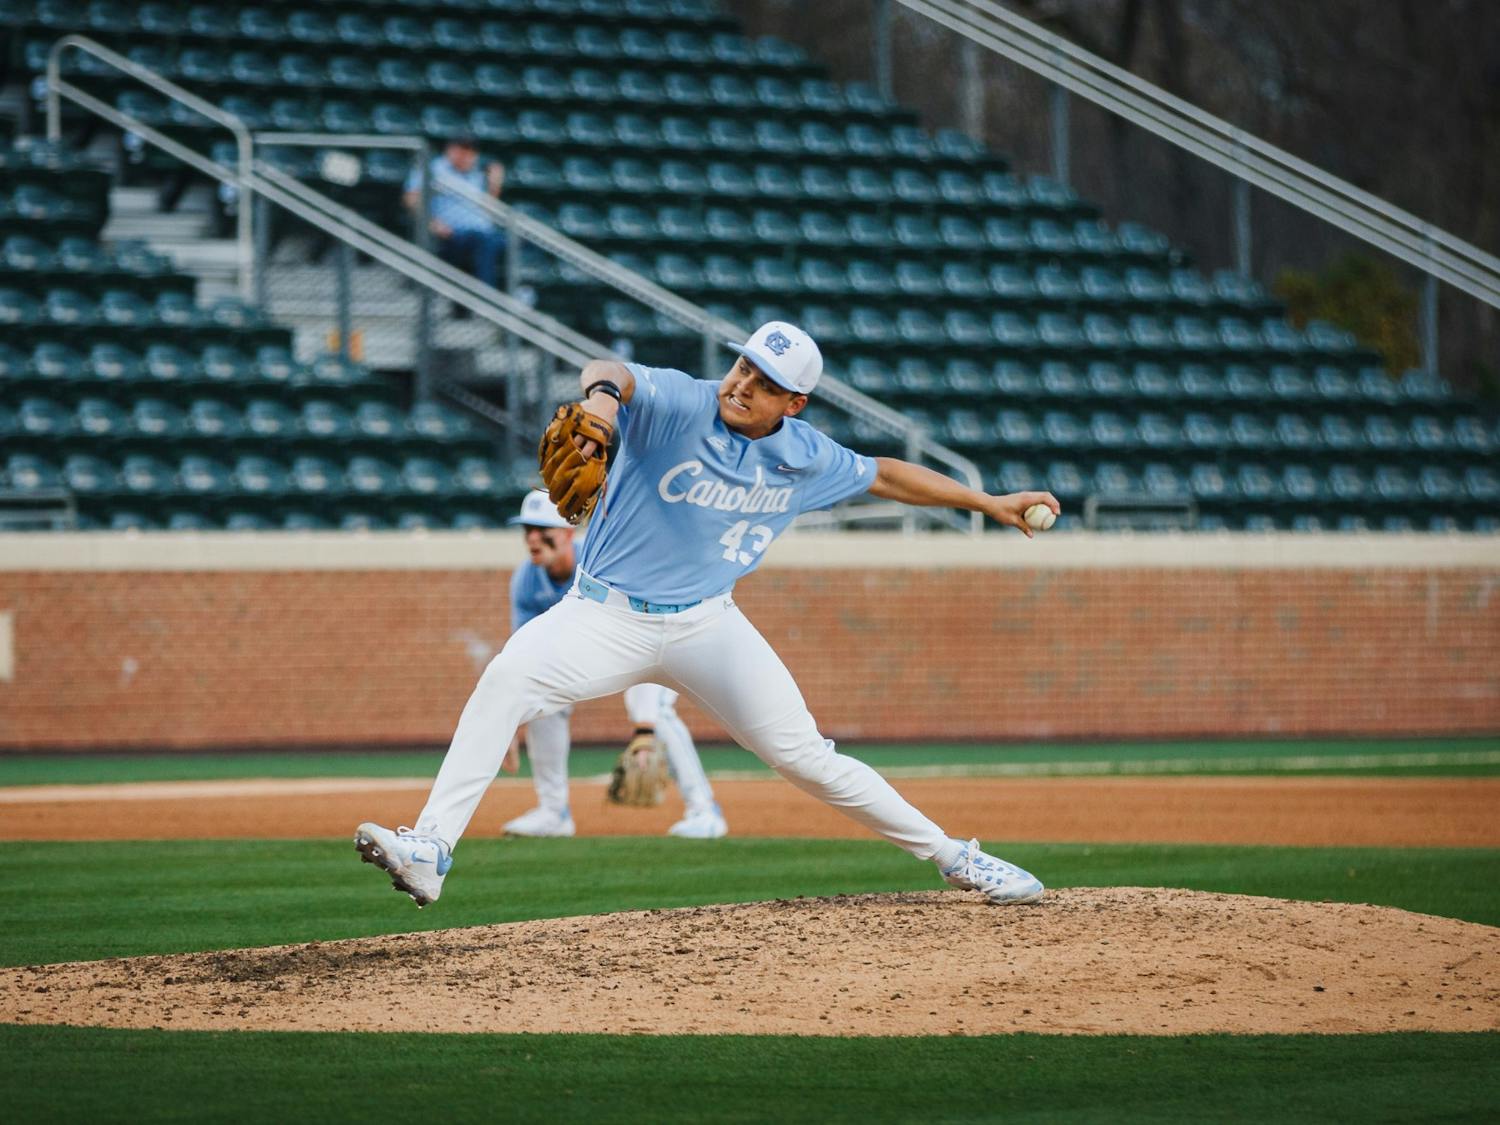 UNC junior pitcher Nelson Berkwich (43) throws a pitch during the baseball game against Radford on Tuesday, Feb. 21, 2023, at Bryson Field. UNC beat Radford 14-2.